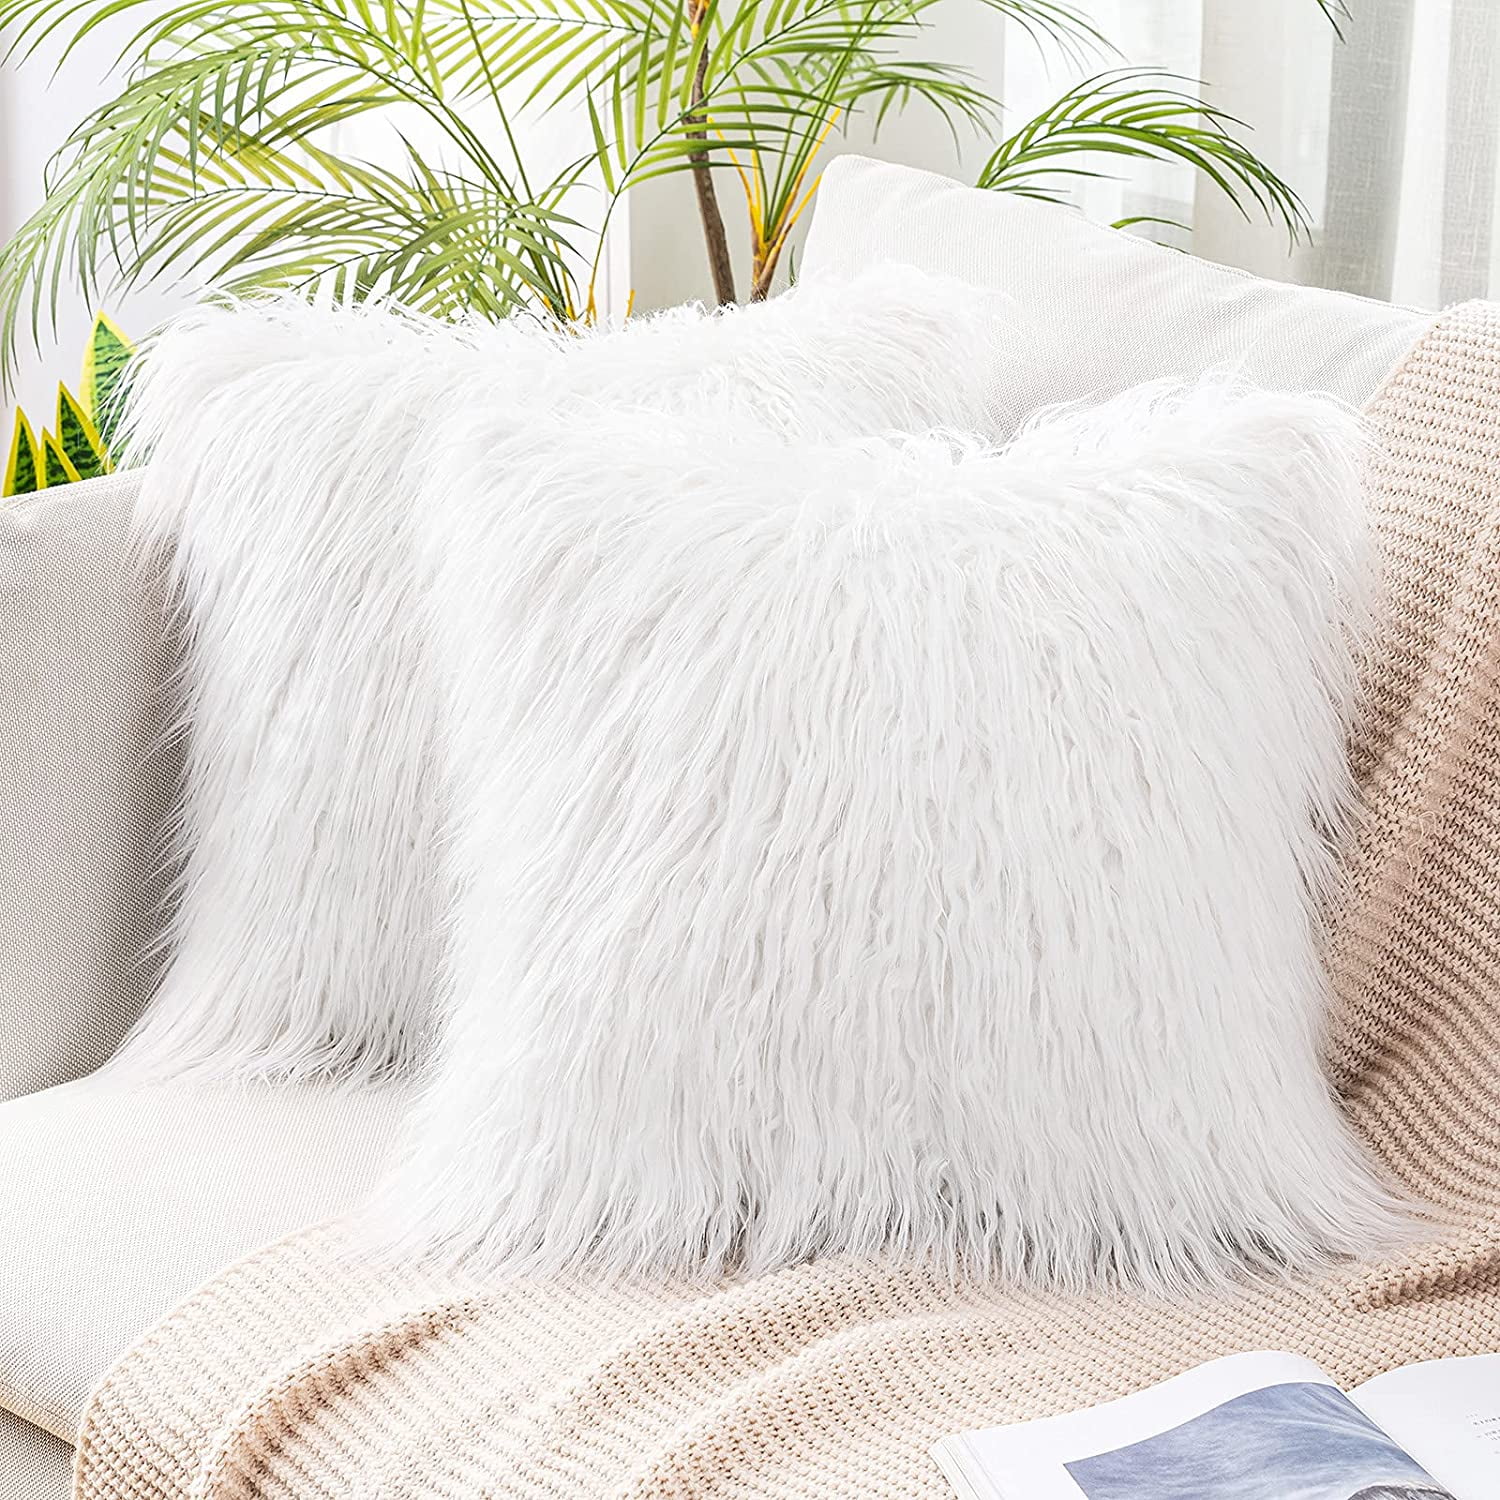 MIULEE Decorative Throw Pillow Covers Luxury Faux Fuzzy Fur Soft Cushion Pillow Case Decor Black Cases for Couch Sofa Bedroom Car 12 x 20 Inch 30 x 50 cm